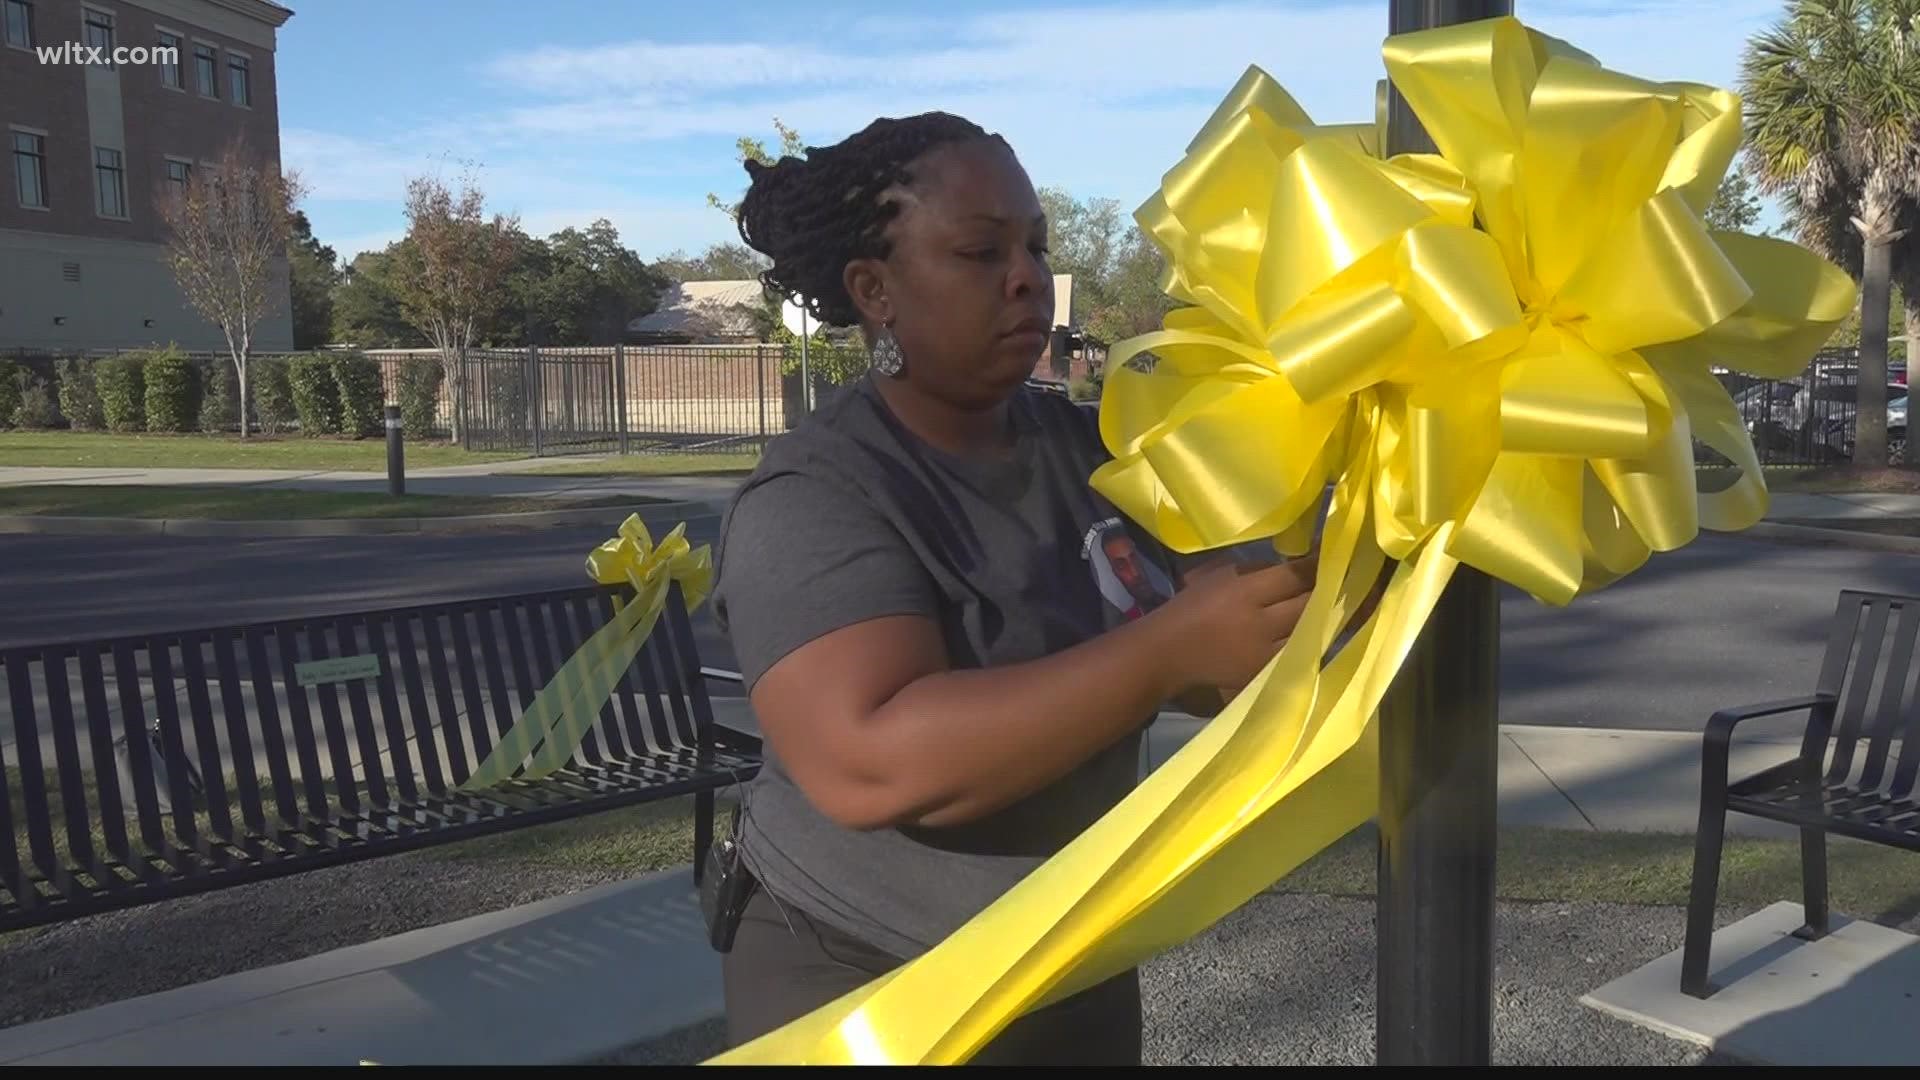 The new memorial in Sumter is highlighting those who have been reported missing.